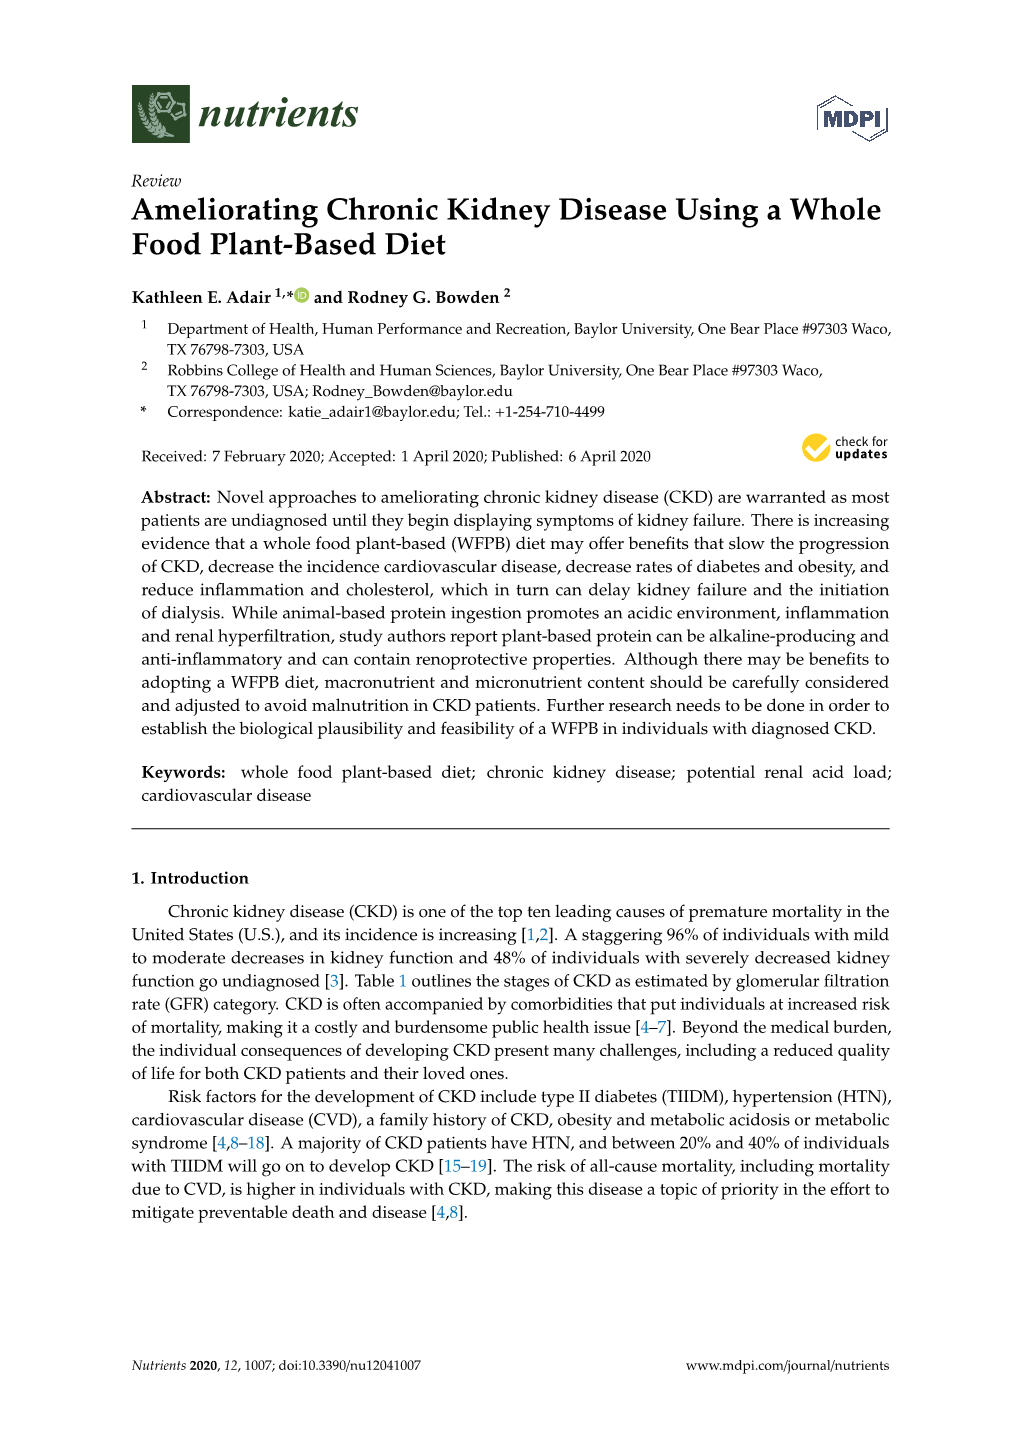 Ameliorating Chronic Kidney Disease Using a Whole Food Plant-Based Diet